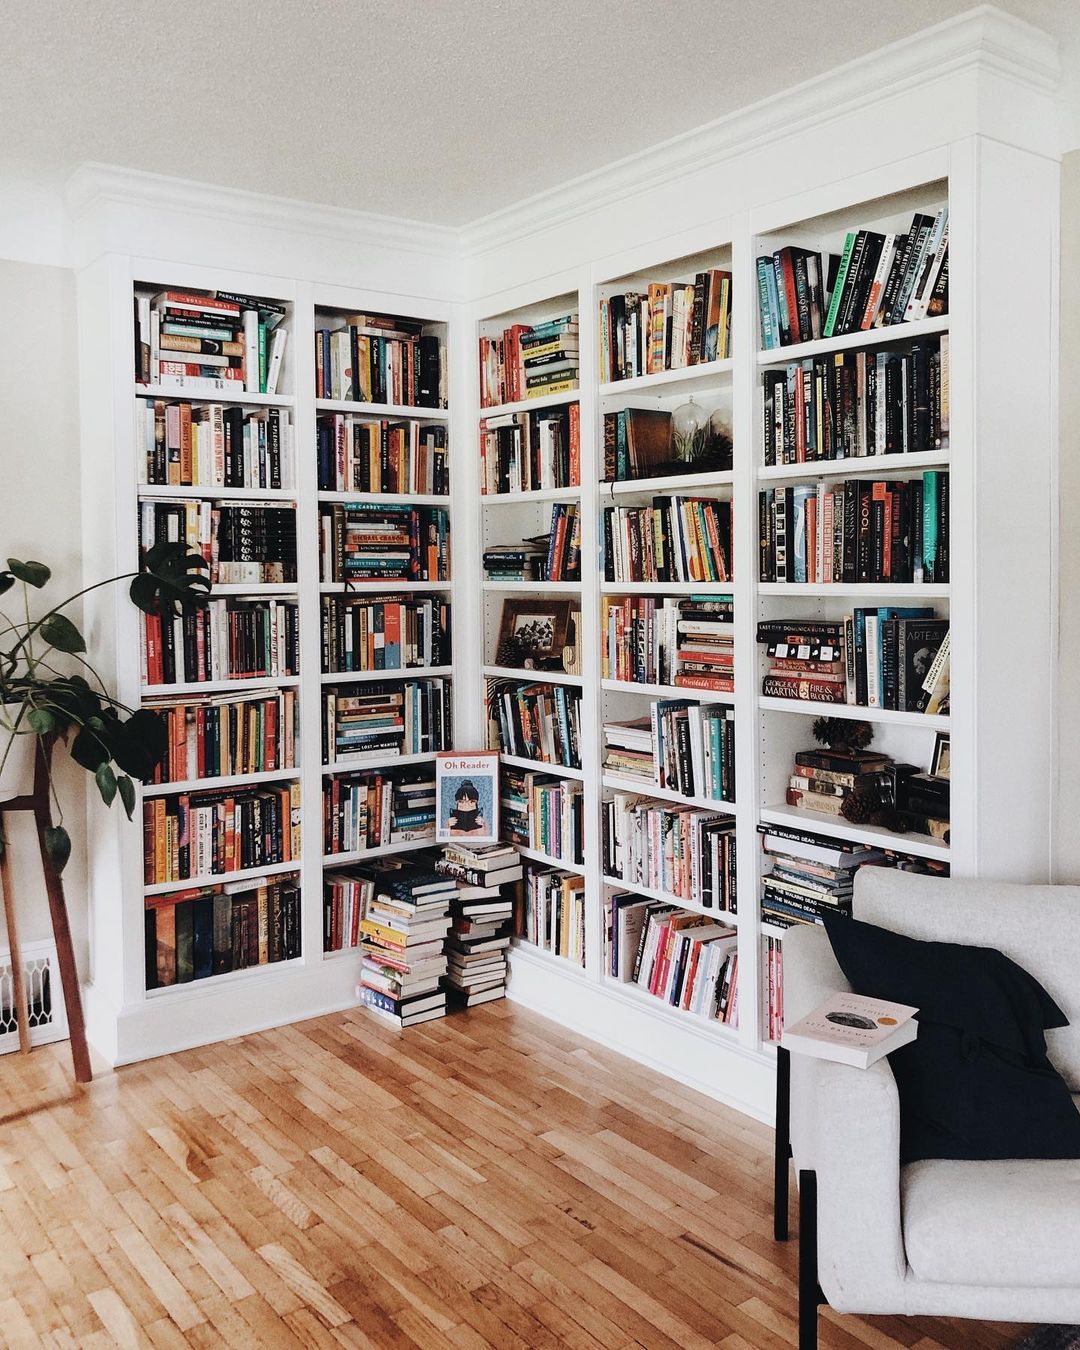 Small Home Library Wall with Lots of Books. Photo by Instagram user @jennareadsbooks